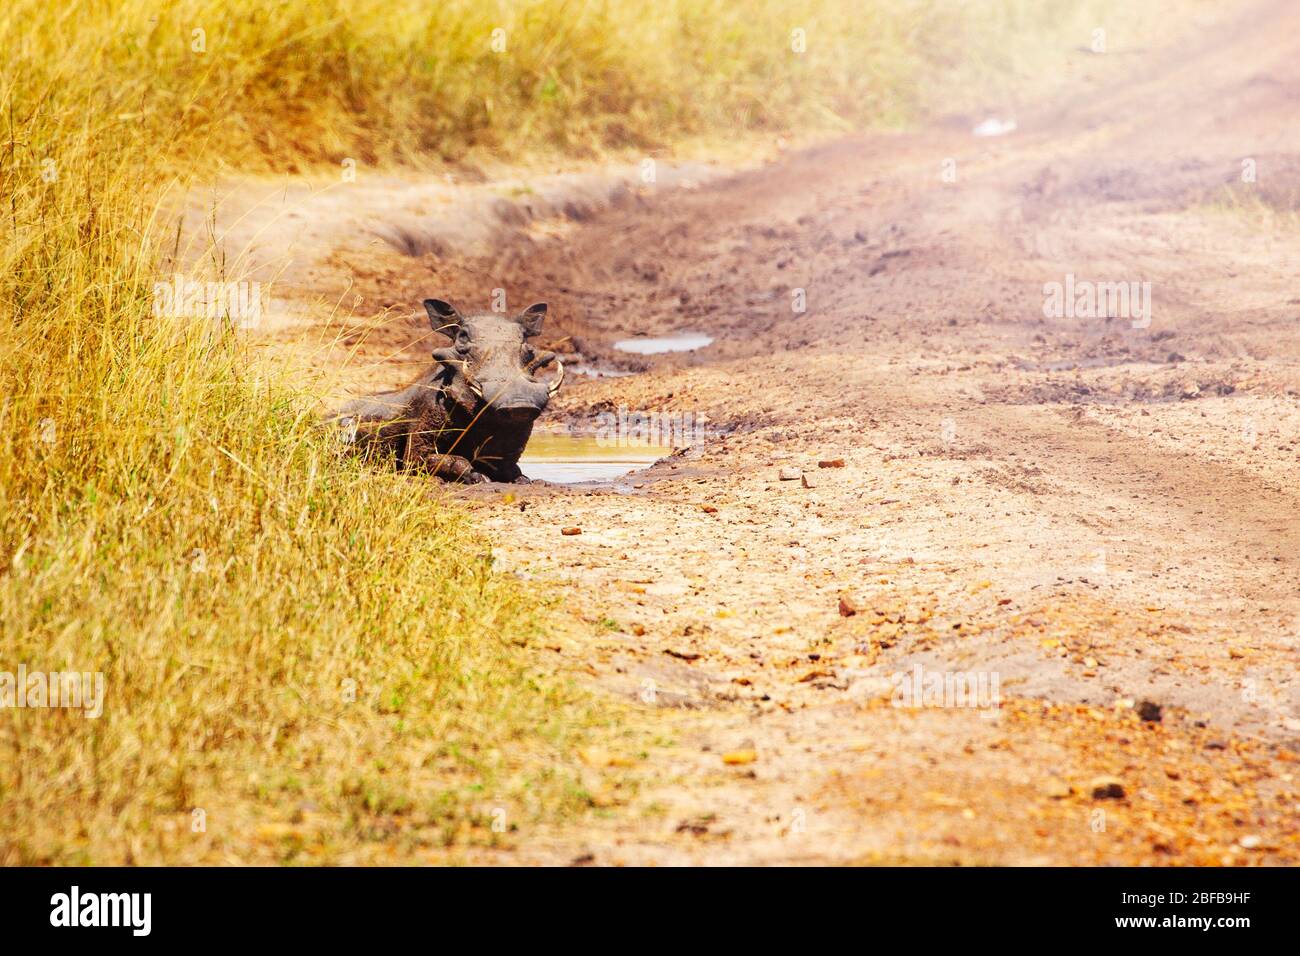 Phacochoerus known as warthogs pig family animal lay in the mud paddle in Kenya savanna, Africa Stock Photo